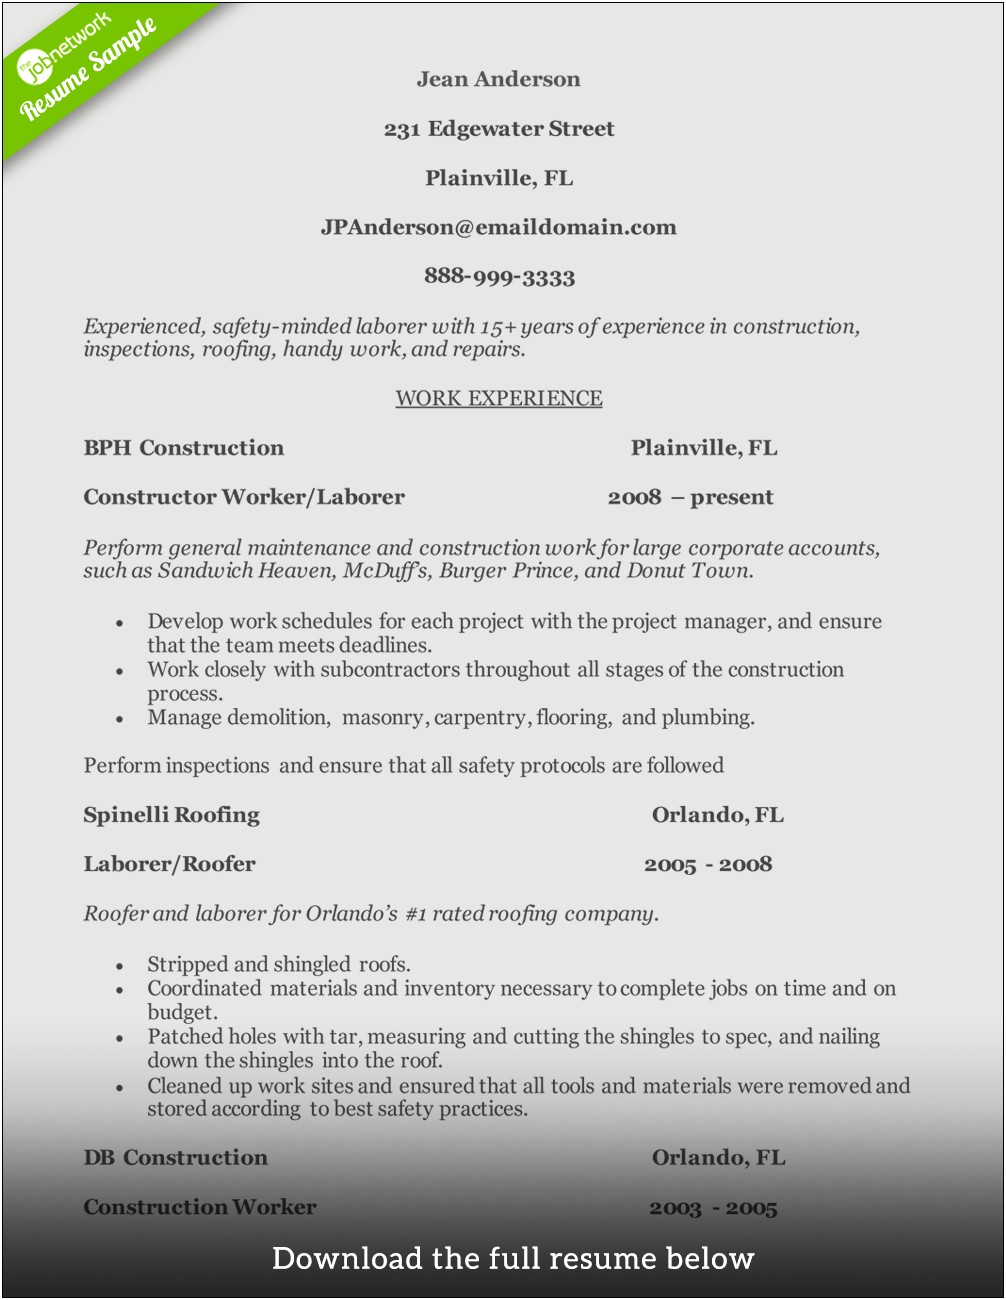 Objective Resume Samples For Concrete Worker